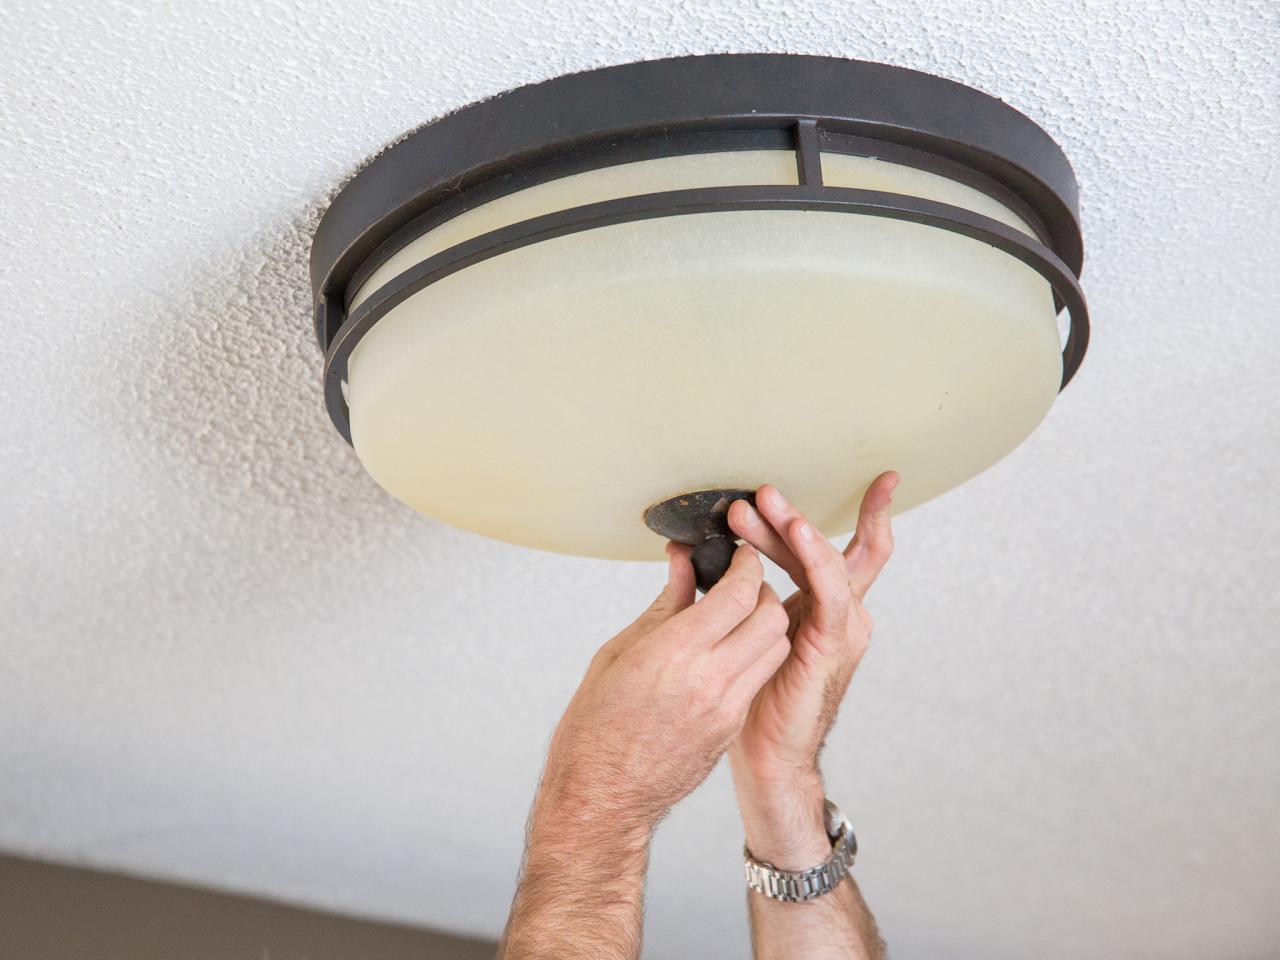 How To Install A Ceiling Fan - How To Install Light Fixture In Ceiling Fan